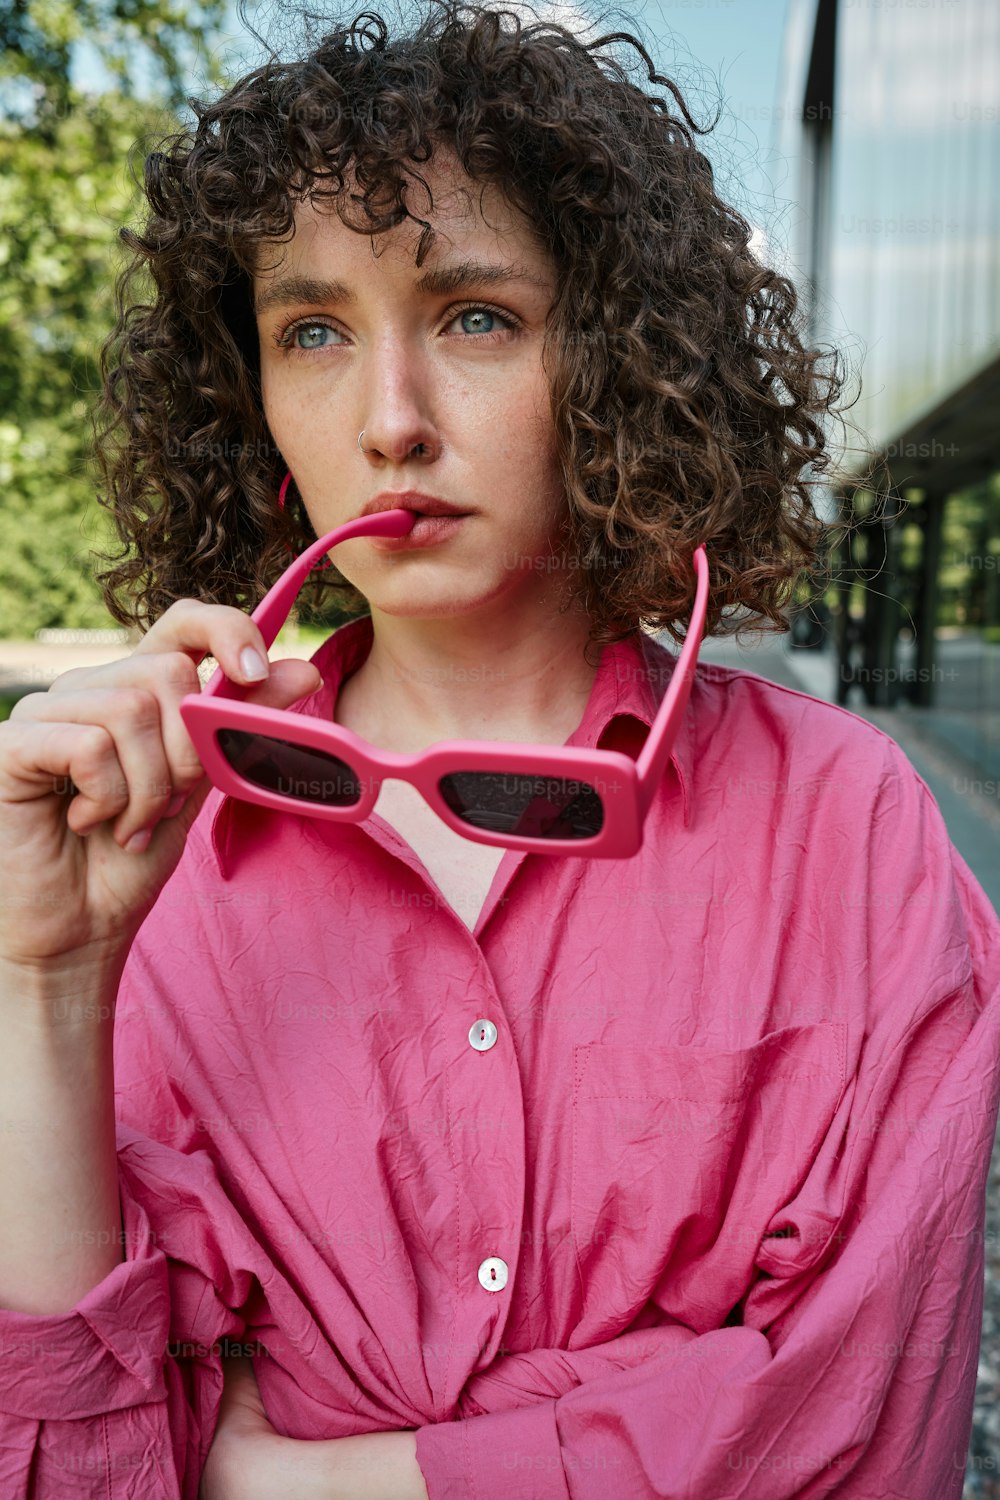 a woman in a pink shirt is holding a pair of sunglasses